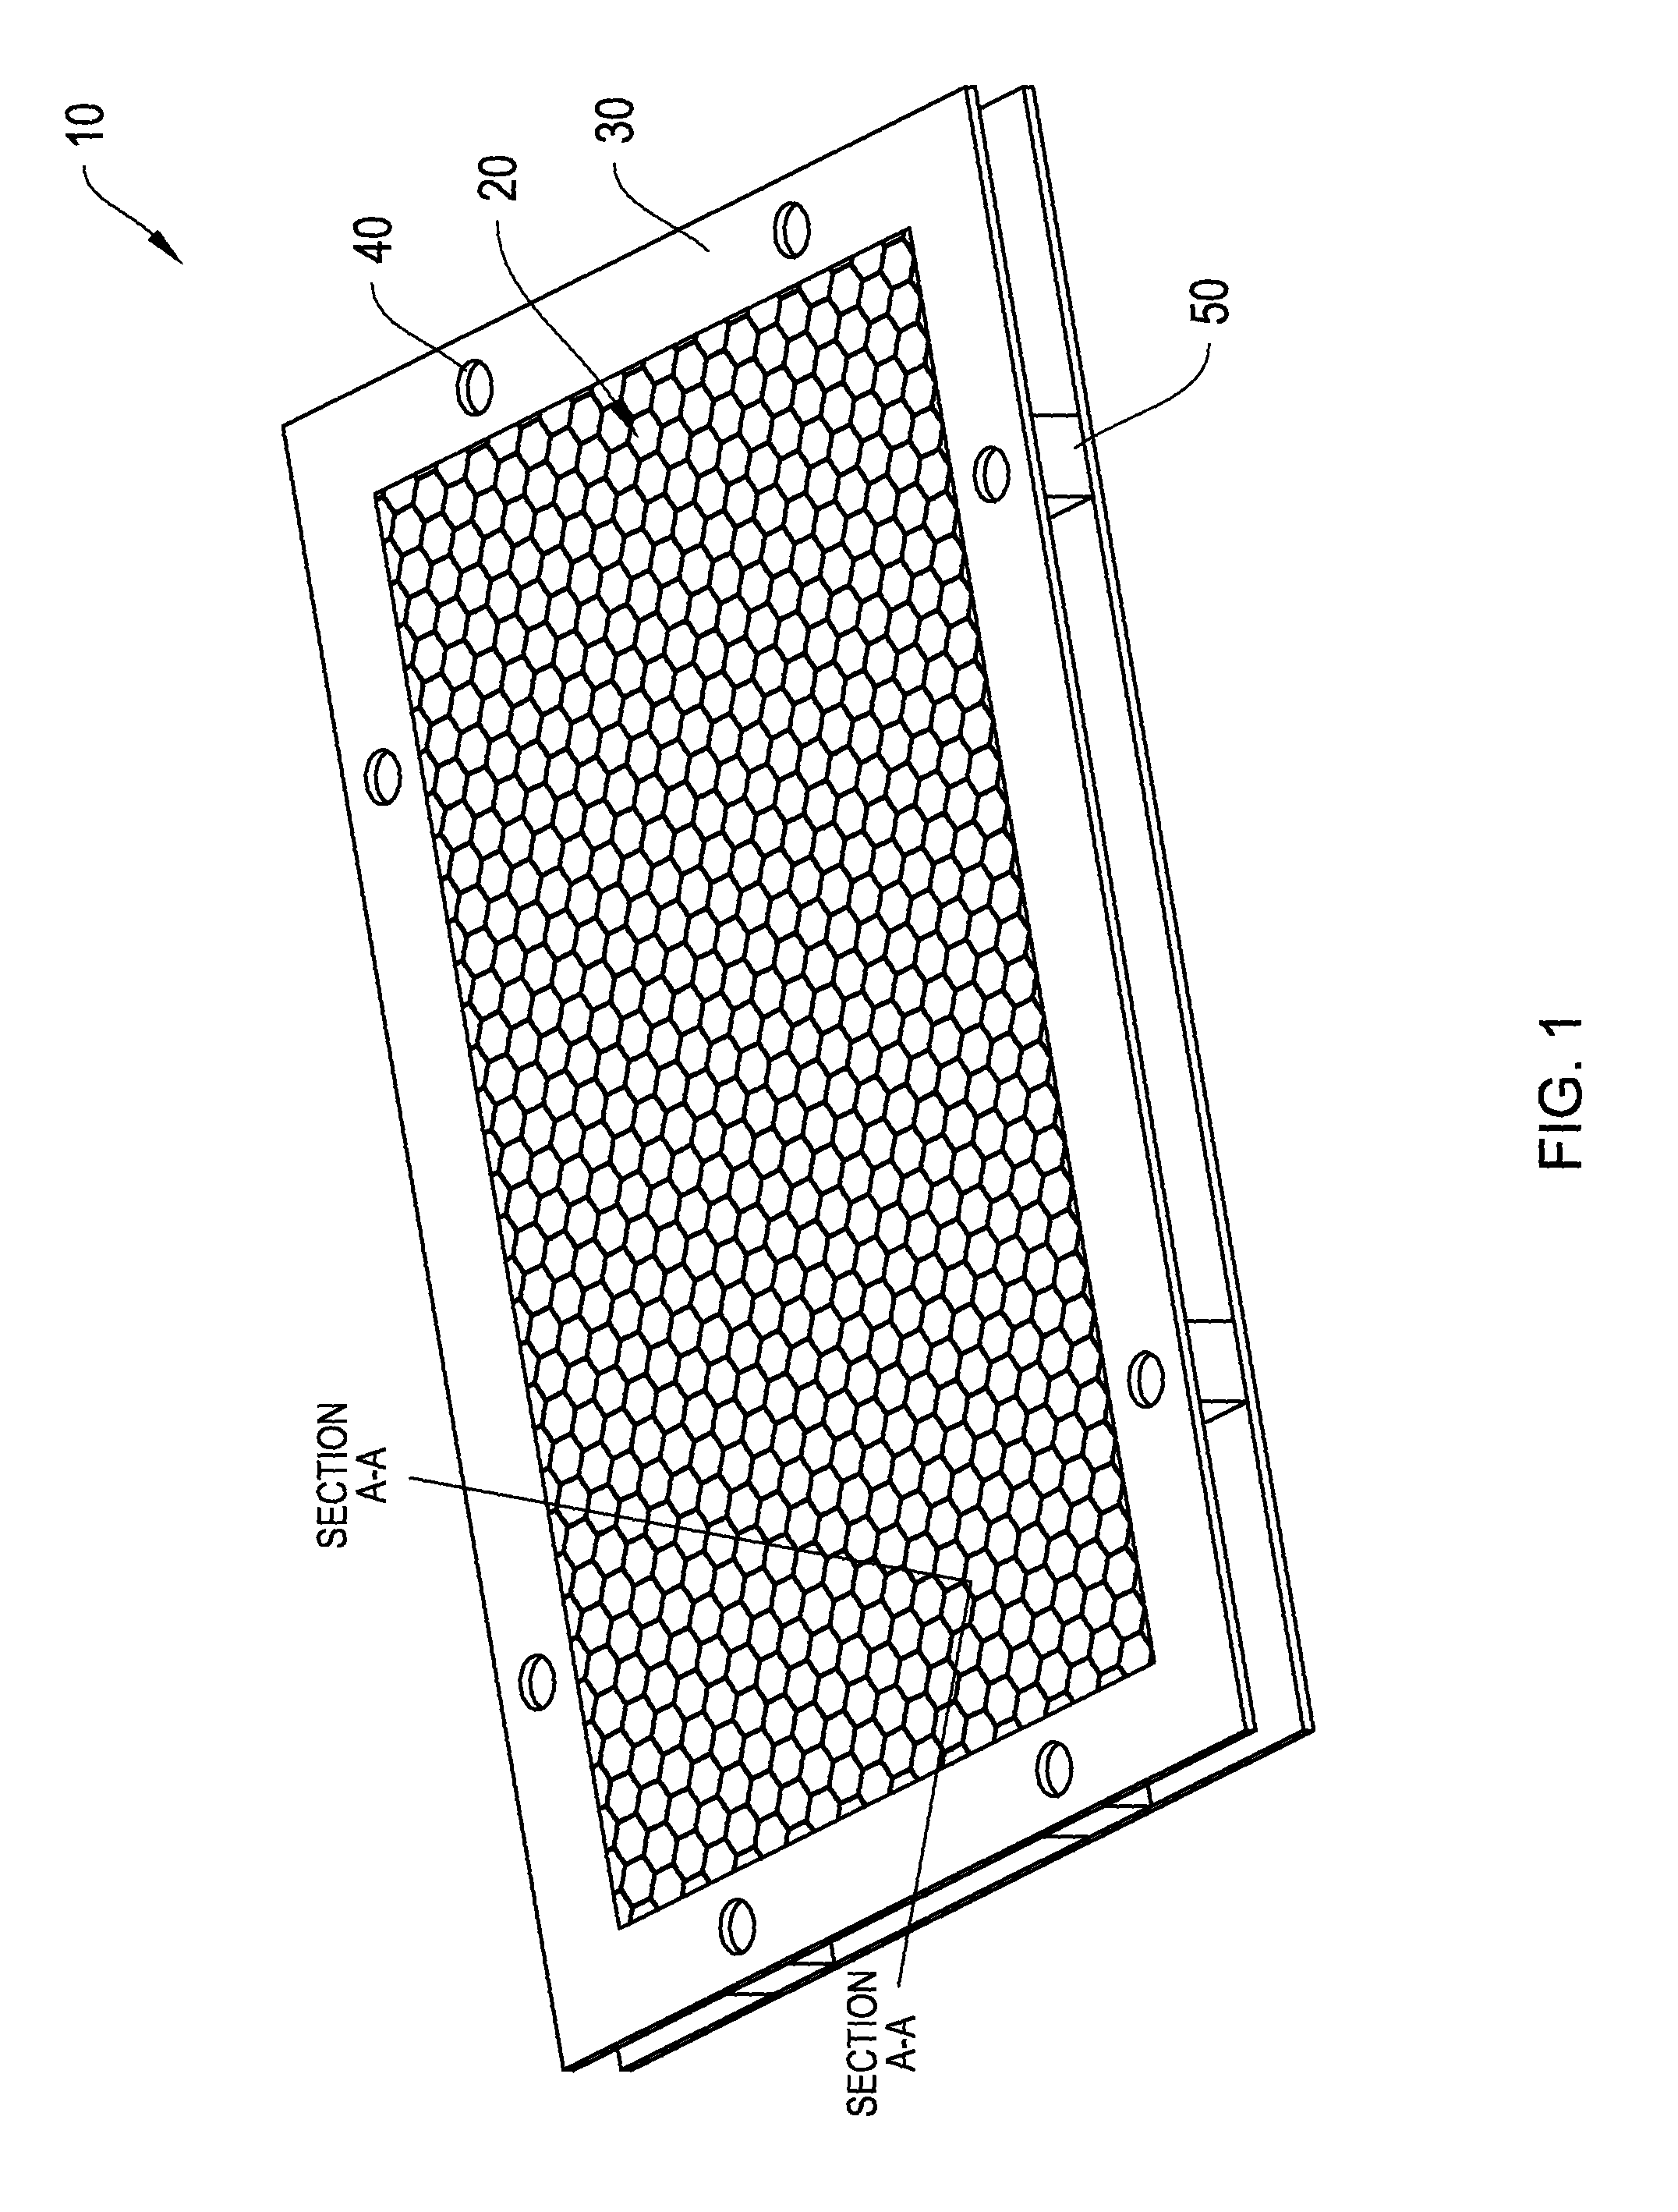 Homogeneous EMI vent panel and method for preparation thereof